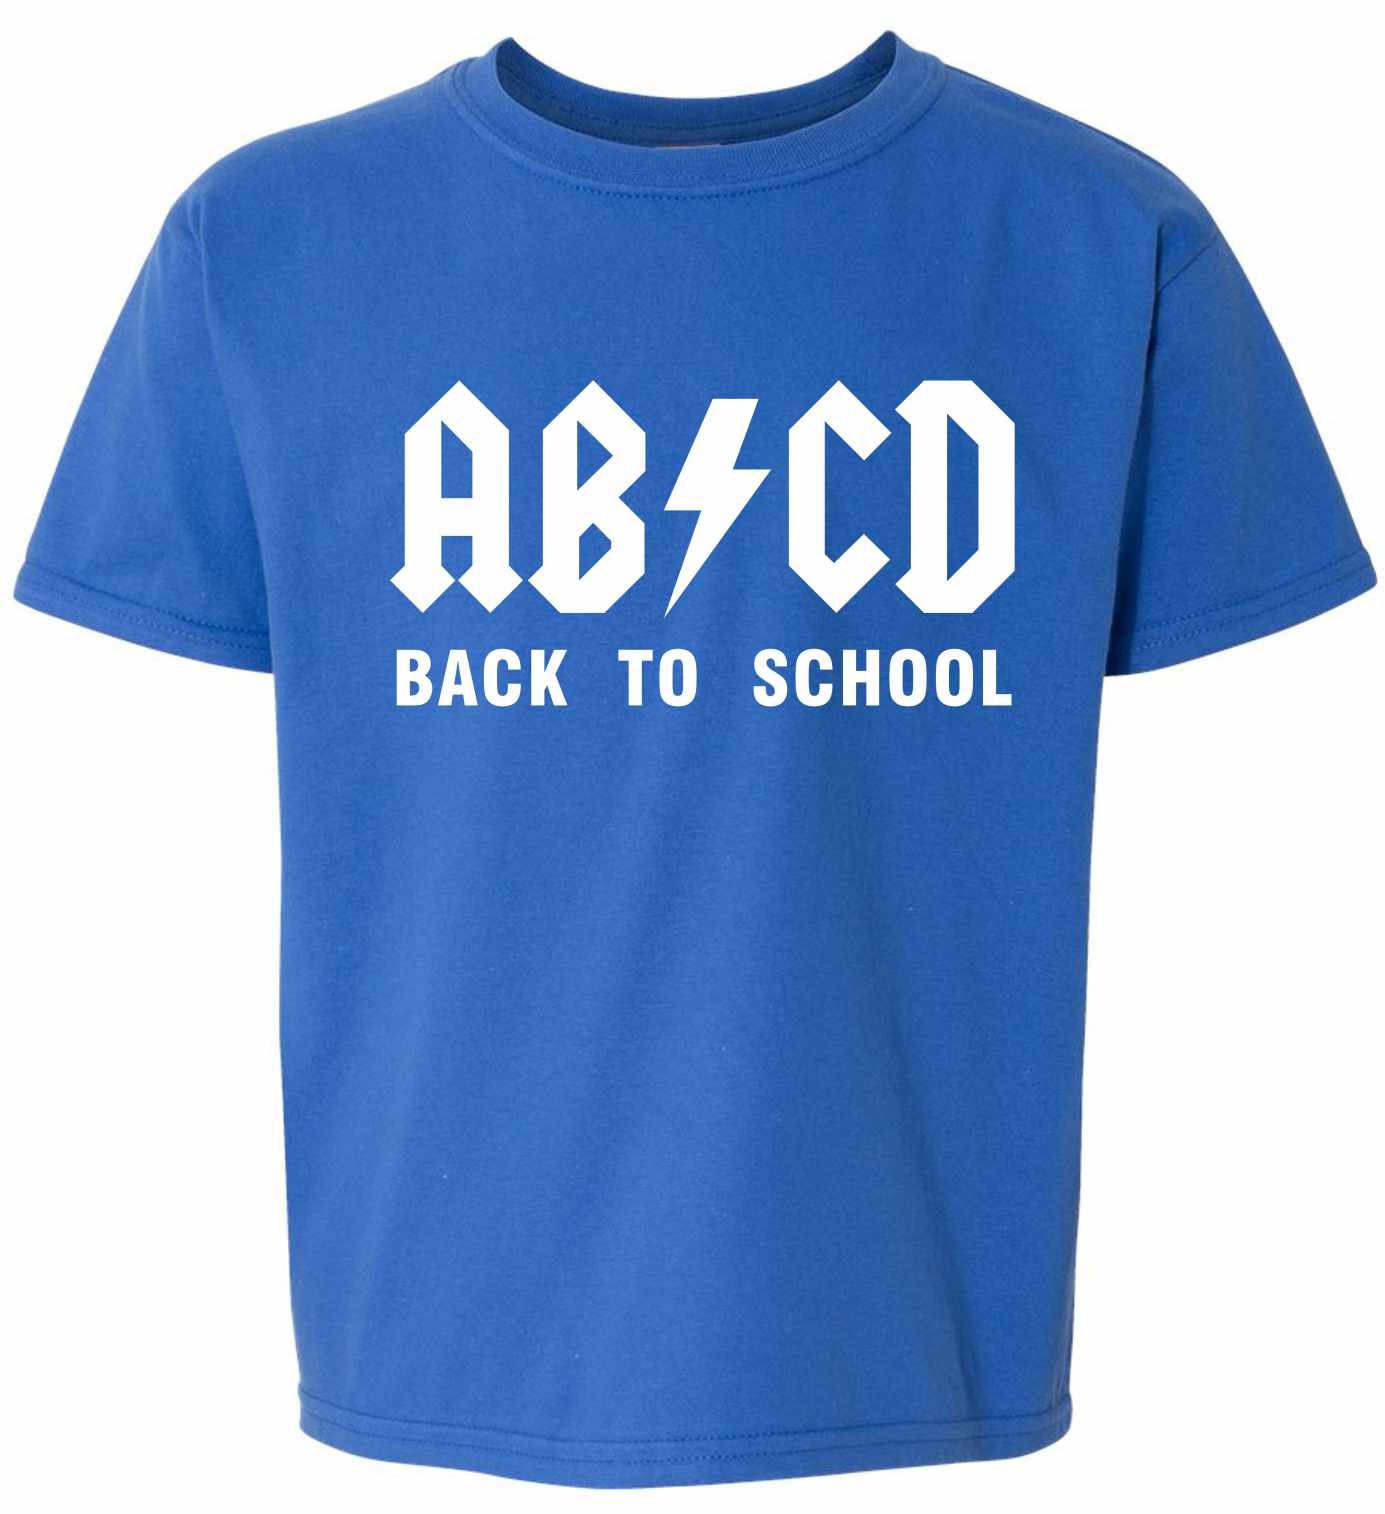 ABCD Back To School on Kids T-Shirt (#1295-201)